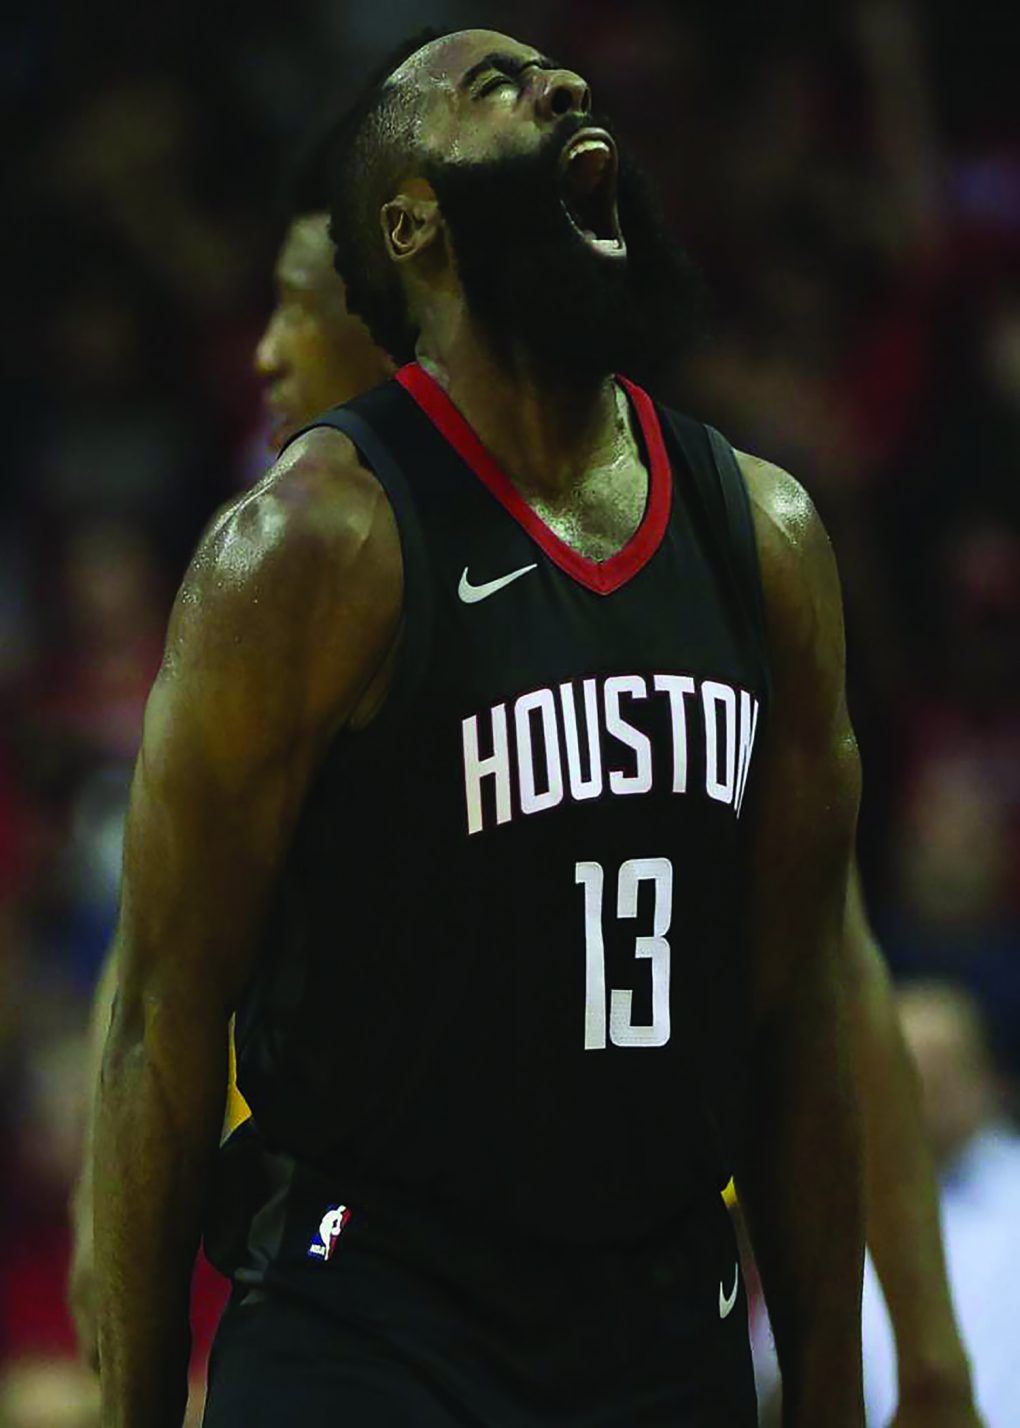 Rockets blast off to top of NBA